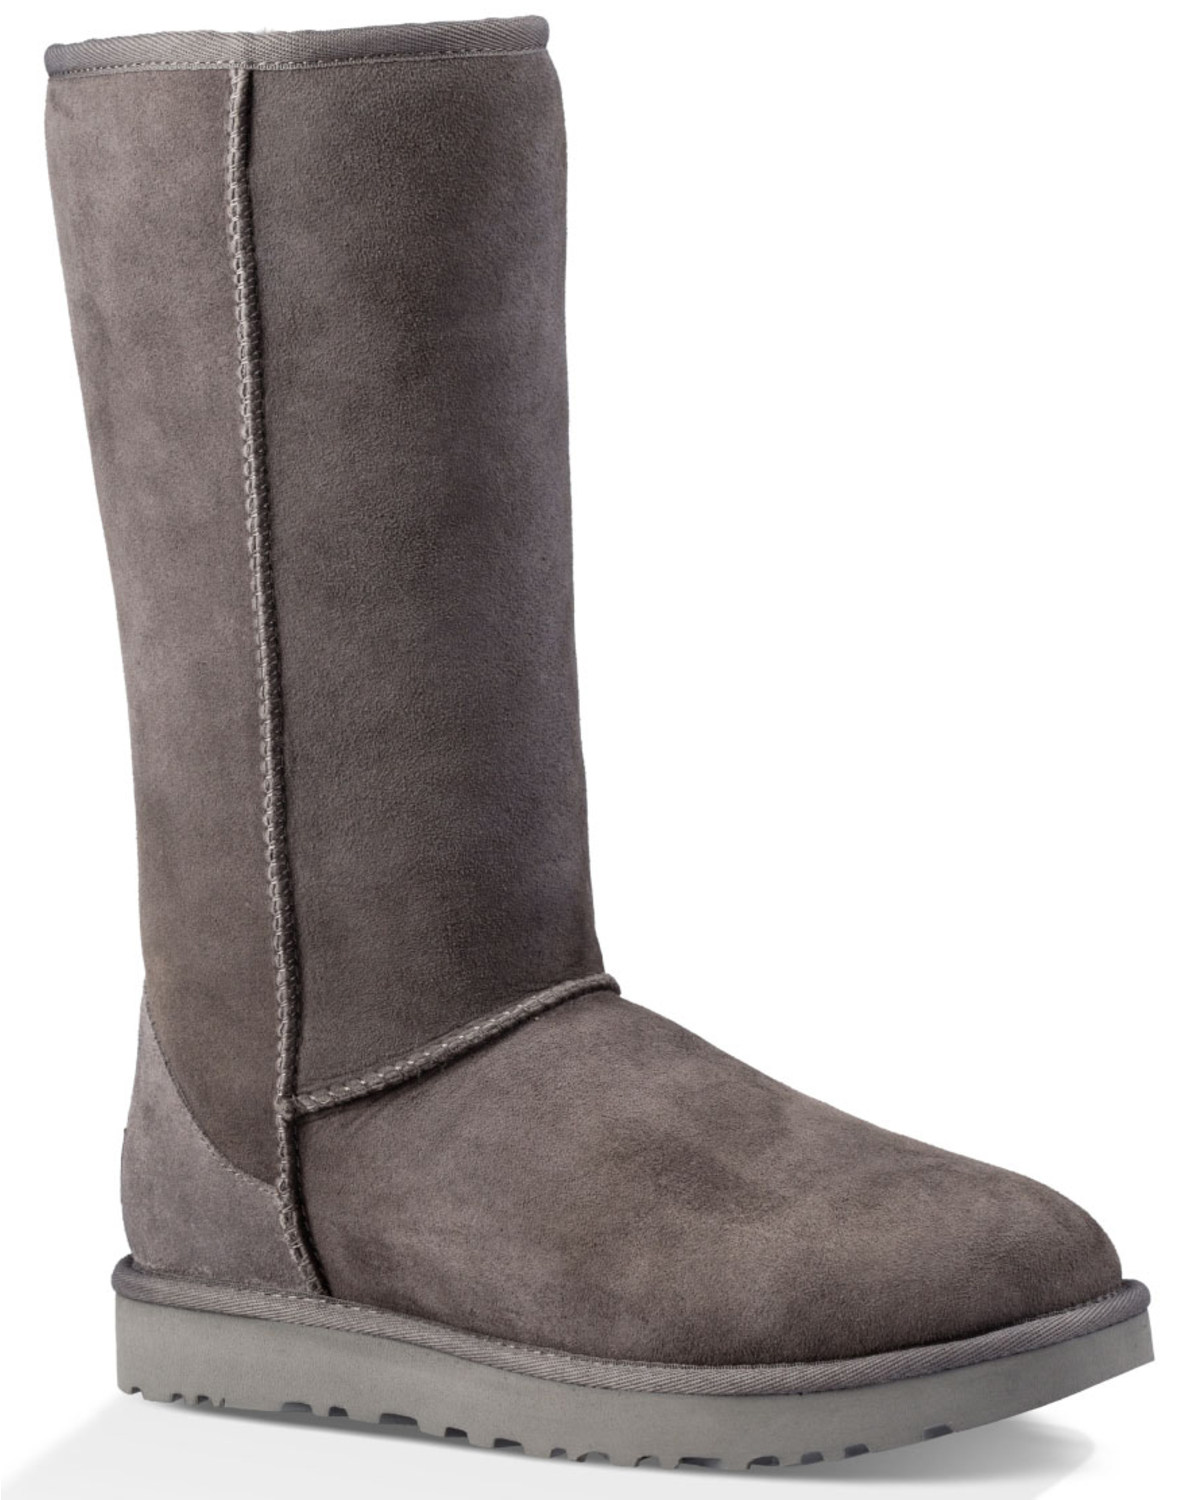 tall gray ugg boots with bows